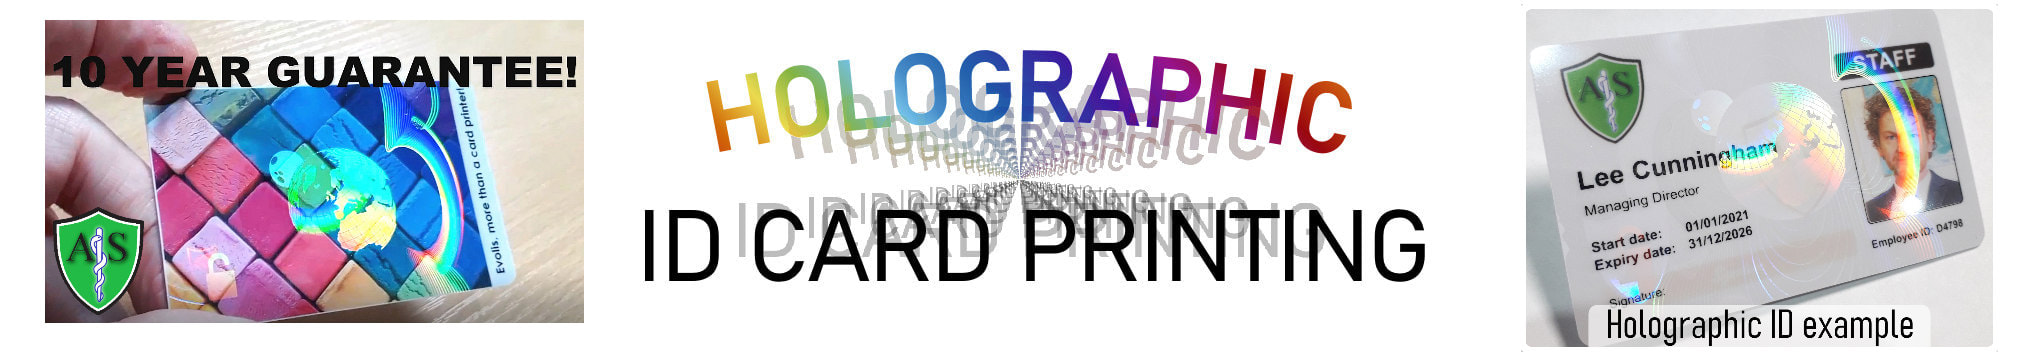 Hull, Kingston-upon-Hull holographic ID card print service. Employee Identity cards with hologram or holograph security mark.